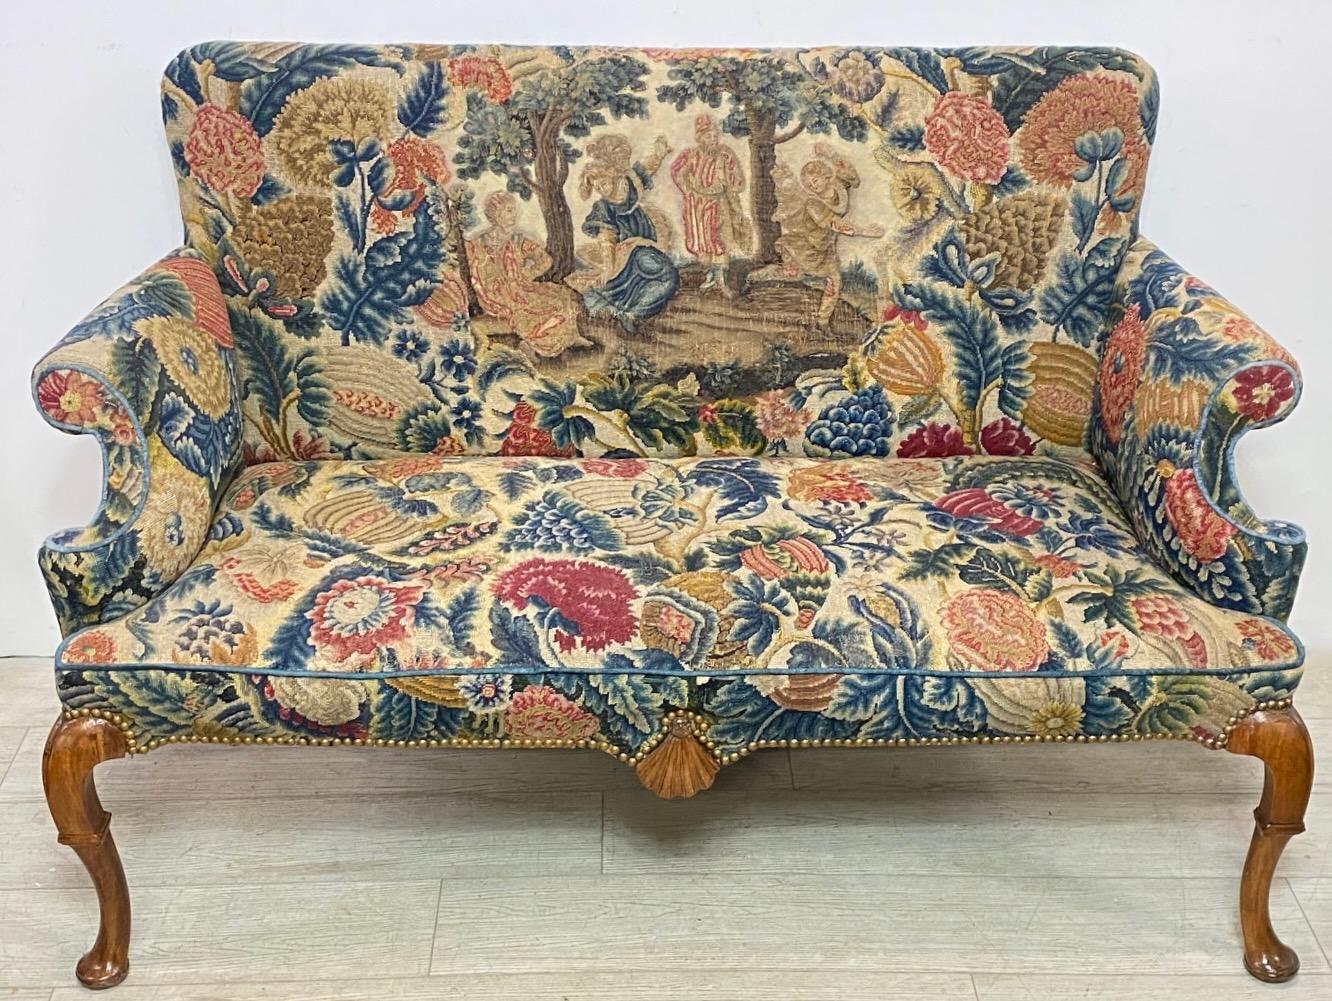 A exceptional late 17th / early 18th century English Queen Anne  mahogany settee with period needlepoint and velvet upholstery. 
Frame is sturdy and structurally sound, and needlepoint tapestry is in very good antique condition. There are some old